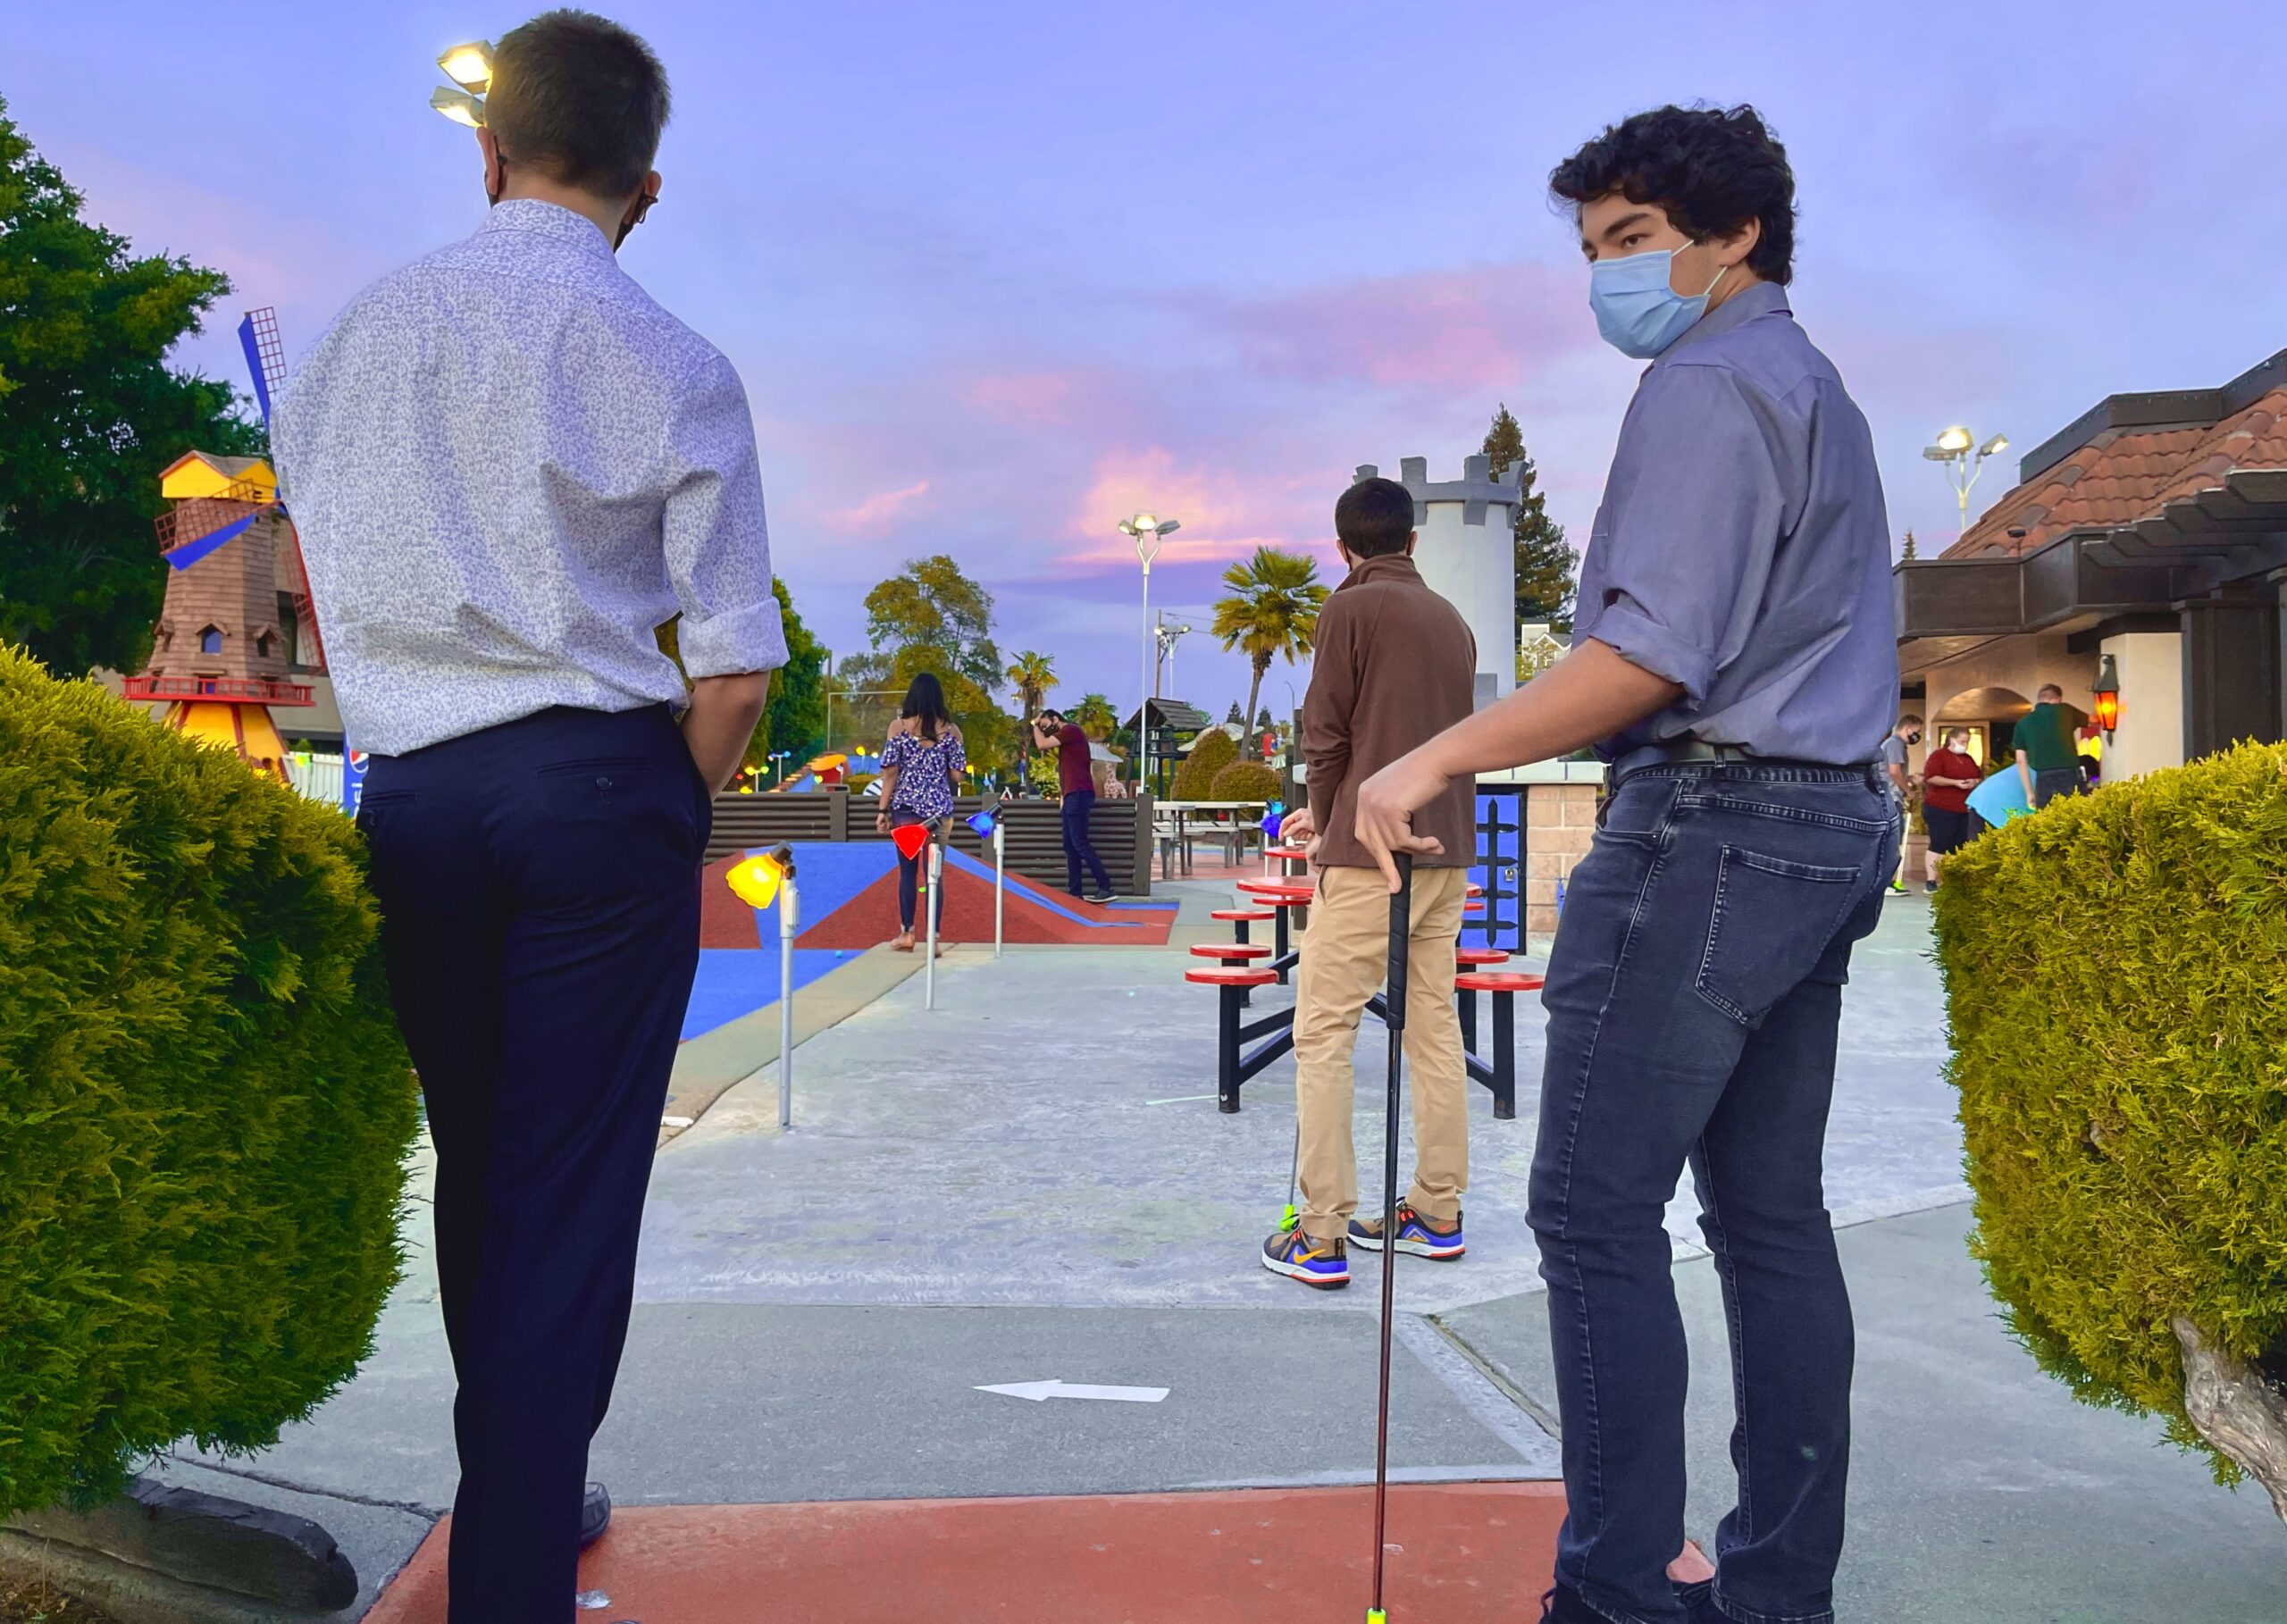 It is dusk at a minigolf place and a few people stand in the foreground looking in various directions. 